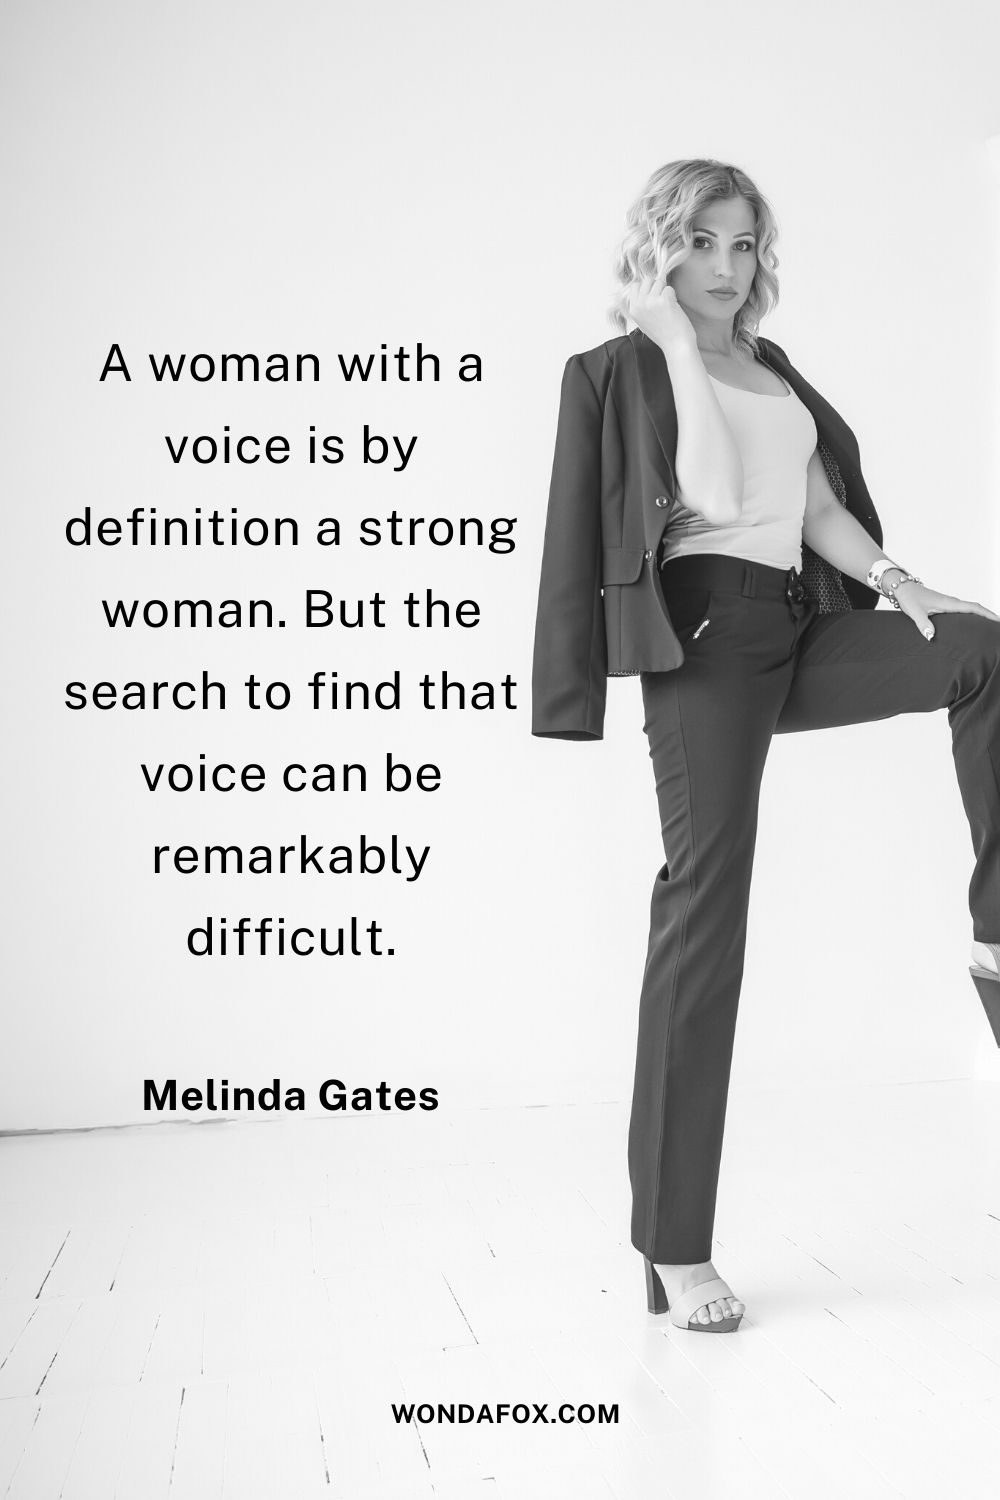 A woman with a voice is by definition a strong woman. But the search to find that voice can be remarkably difficult.